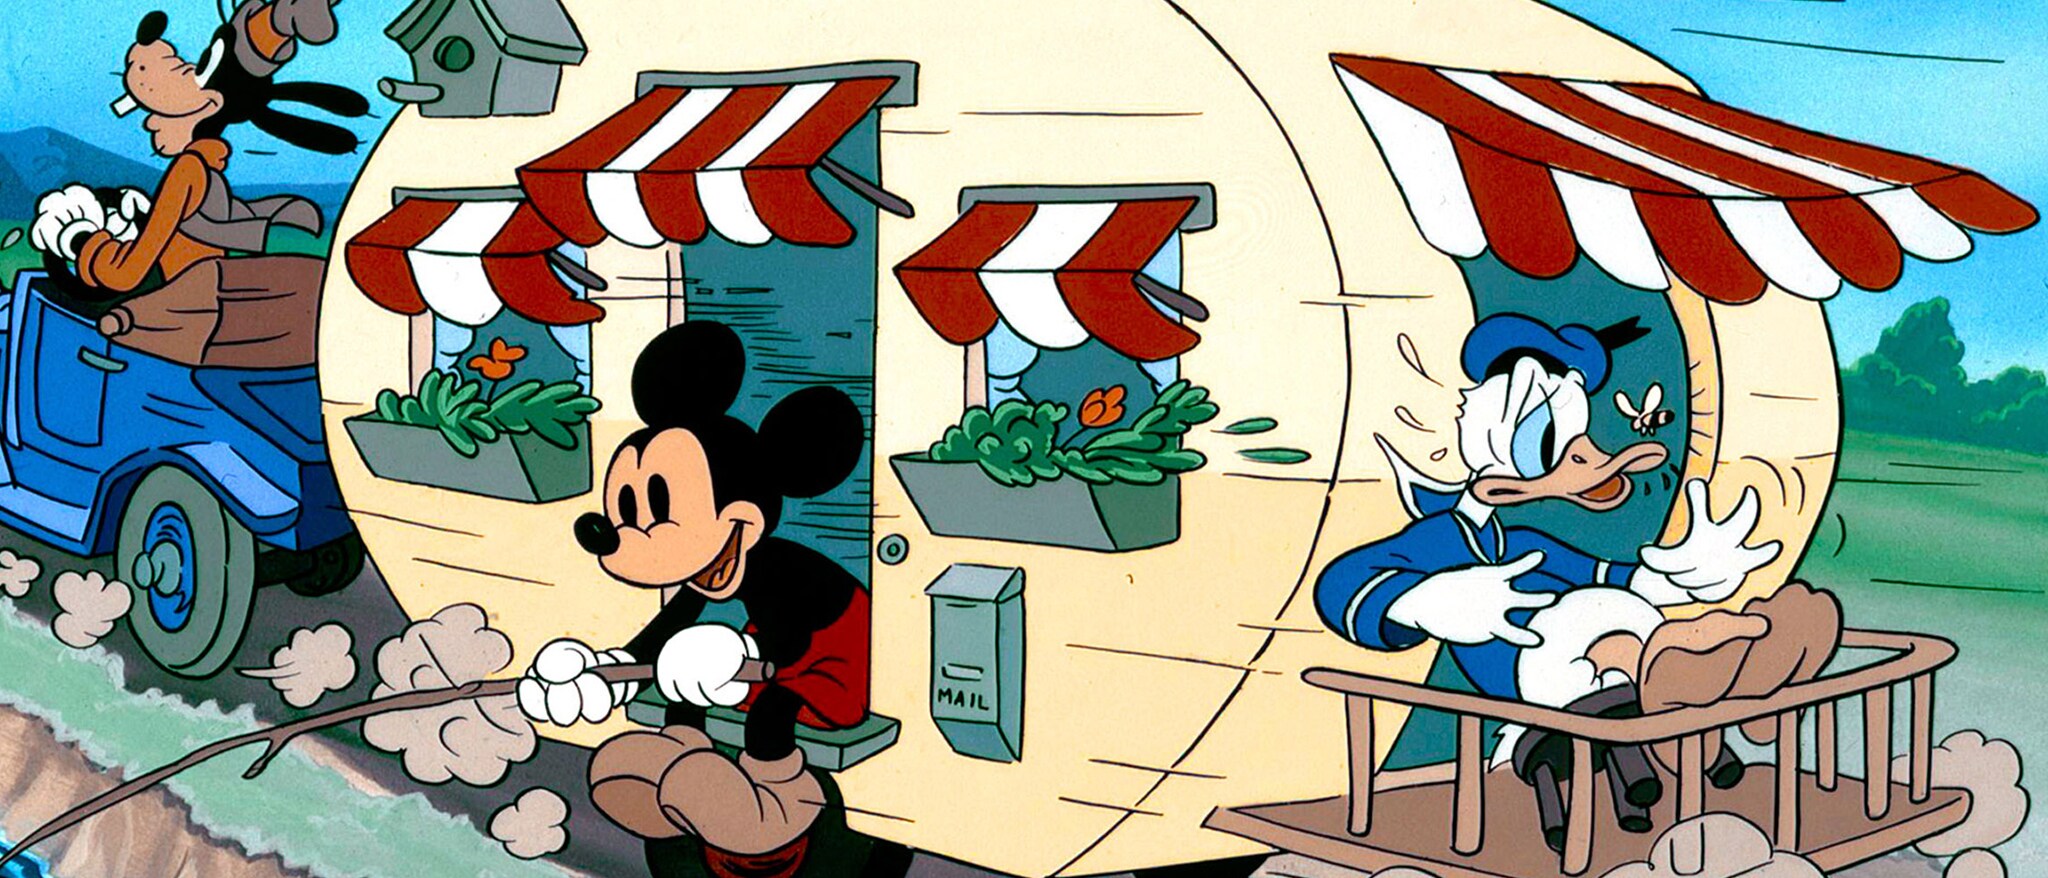 Mickey & Friends: 10 Classic Shorts - Volume 2 - Featured Content Banner